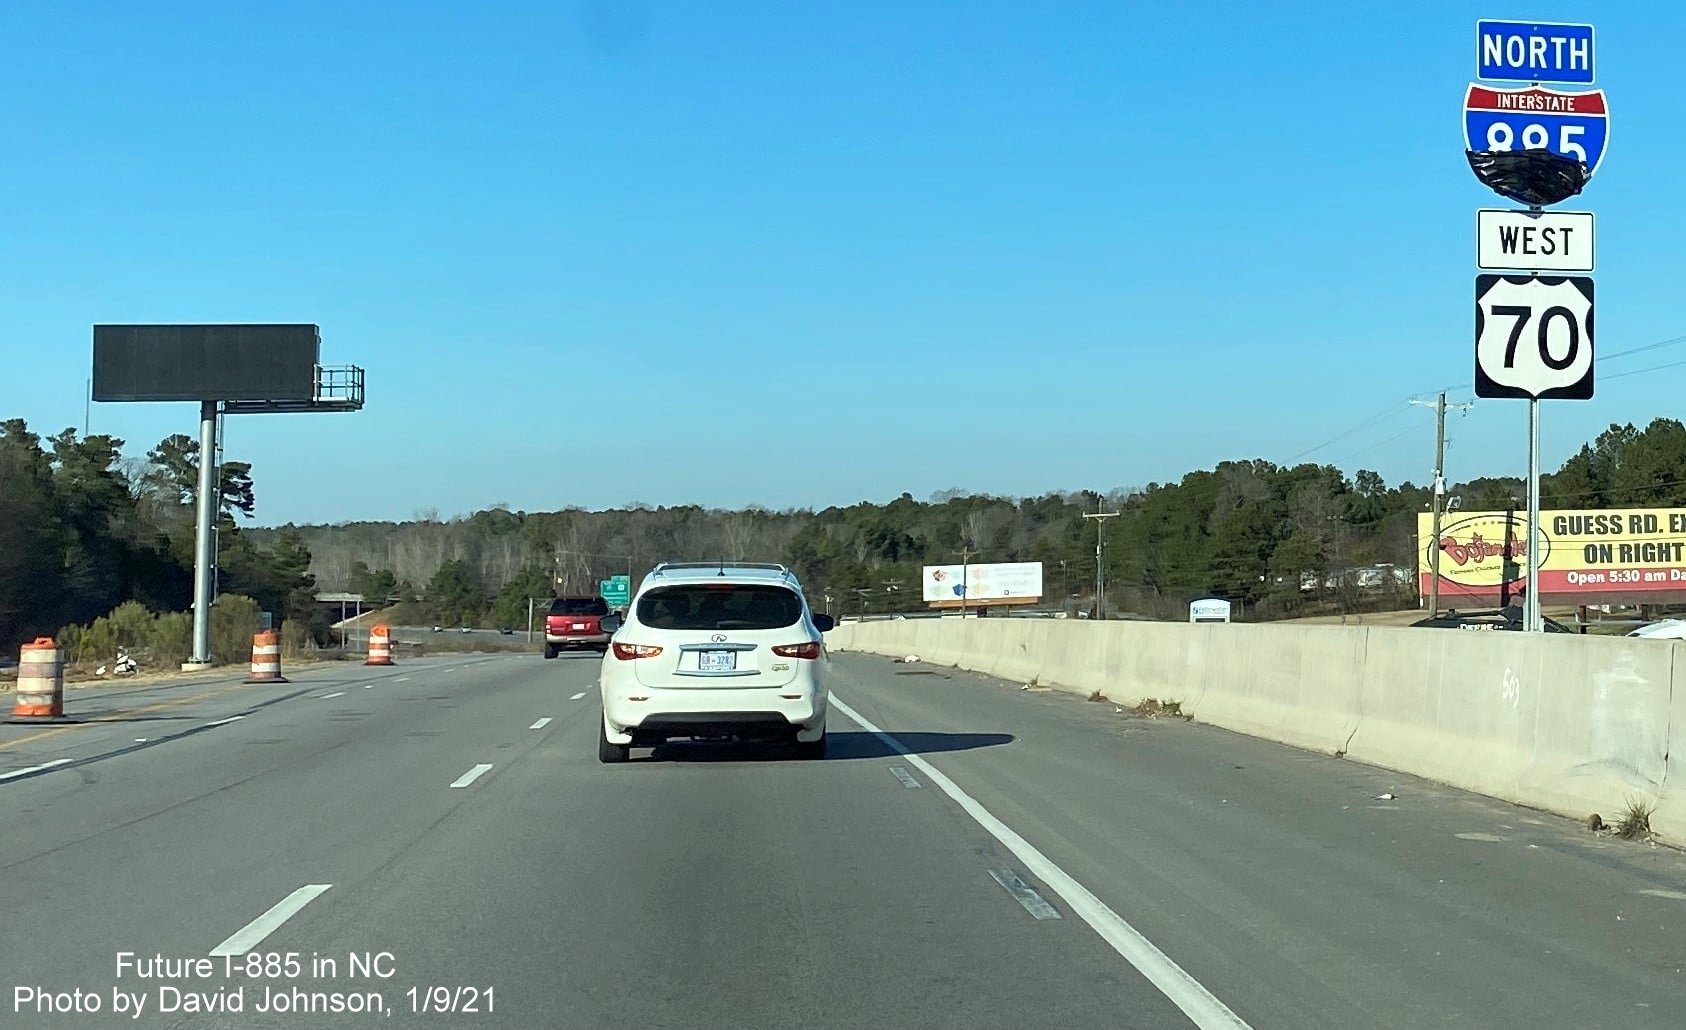 Image of newly placed partially covered I-885 North/US 70 West reassurance marker in Durham, by David Johnson, January 2021